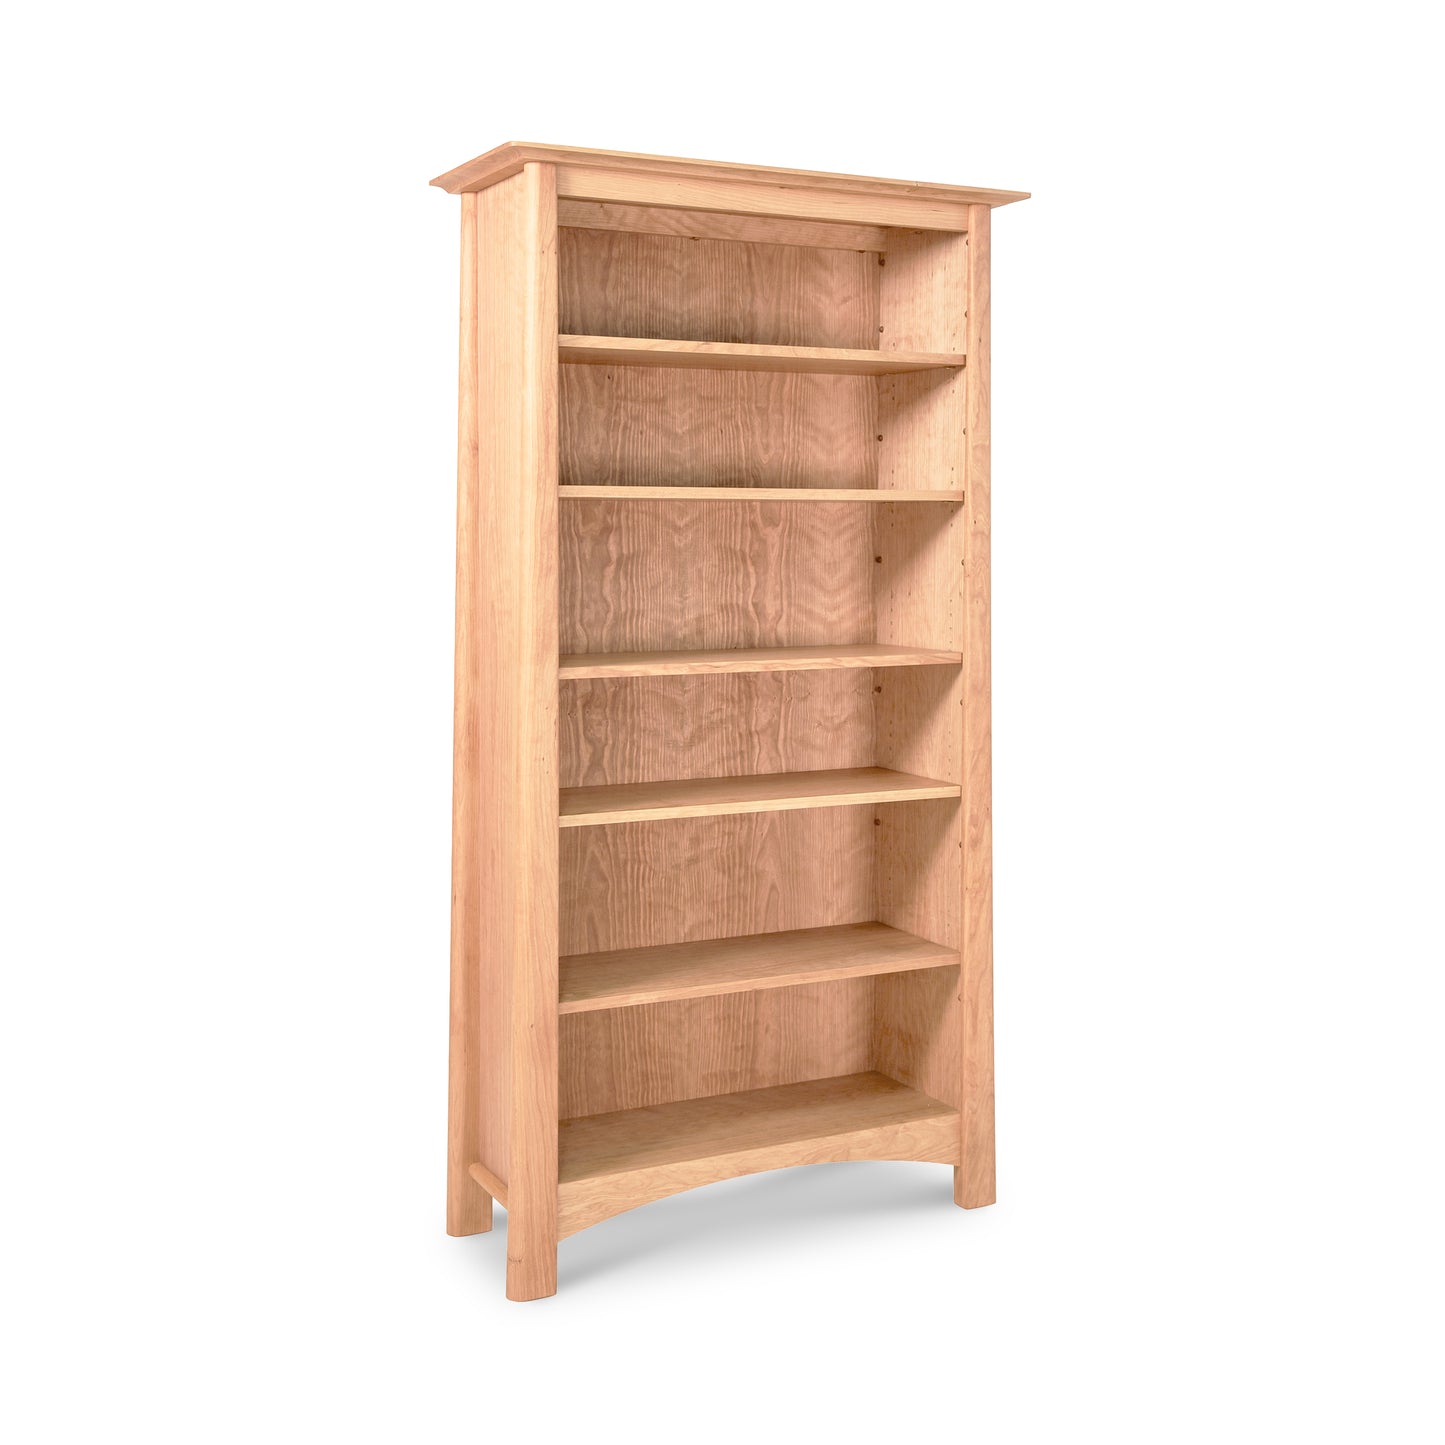 A tall Maple Corner Woodworks Cherry Moon bookcase with five shelves, crafted from sustainably harvested hardwoods, isolated on a white background.